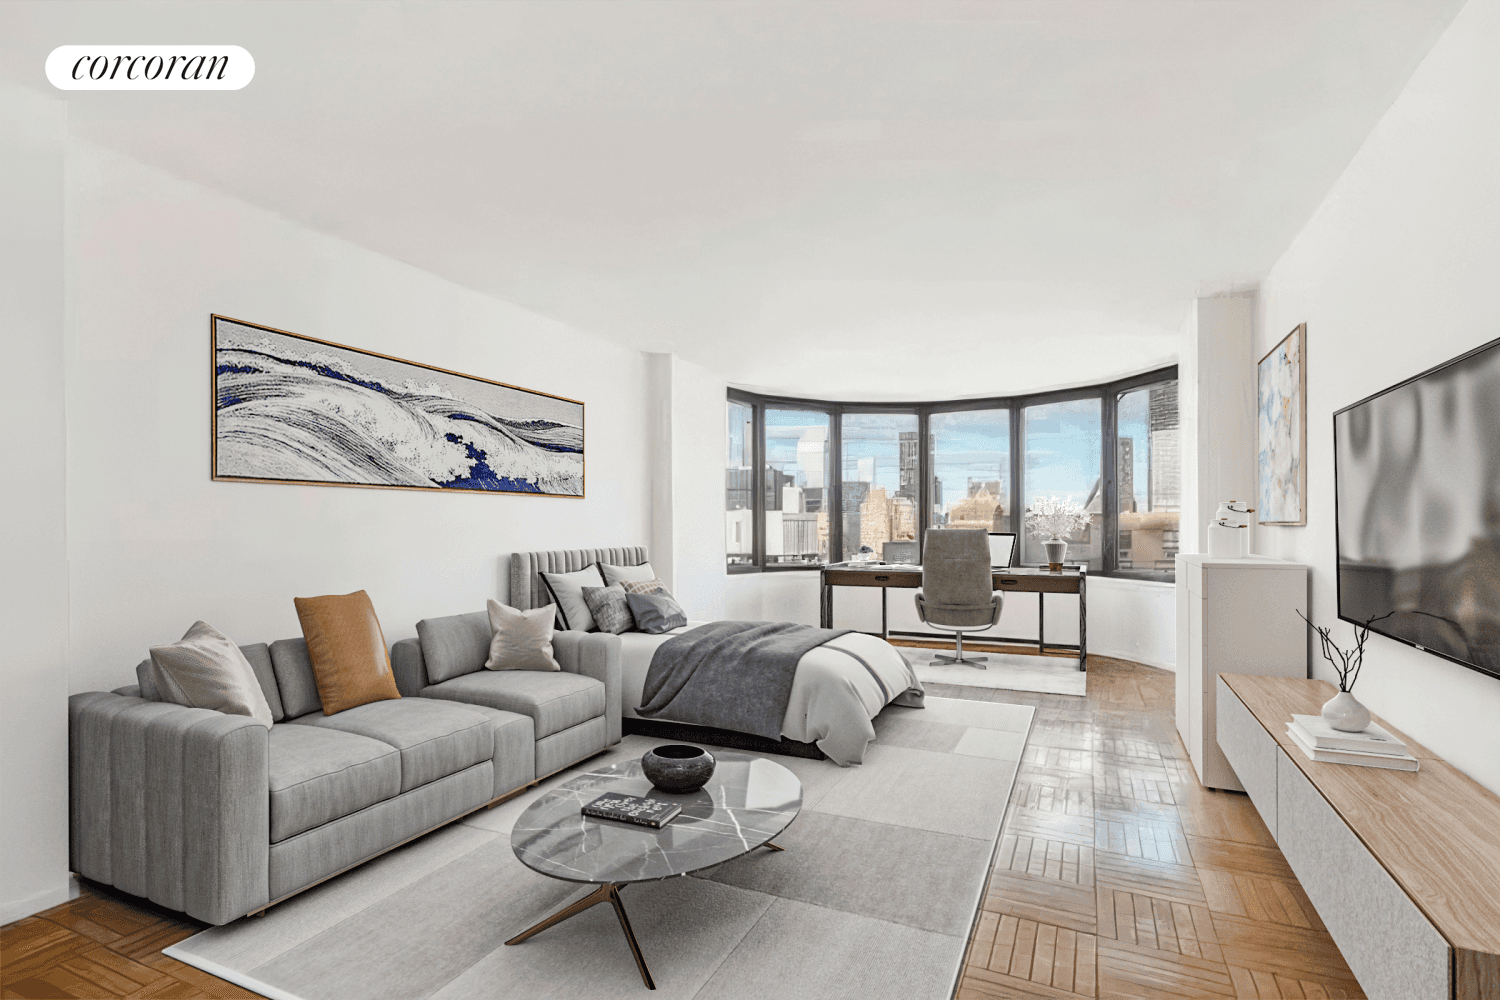 Welcome to Apartment 5H at Corinthian Condominium, Spacious and bright studio with wall to wall bay windows with amazing city and river views, Apartment features entry foyer that leads to ...